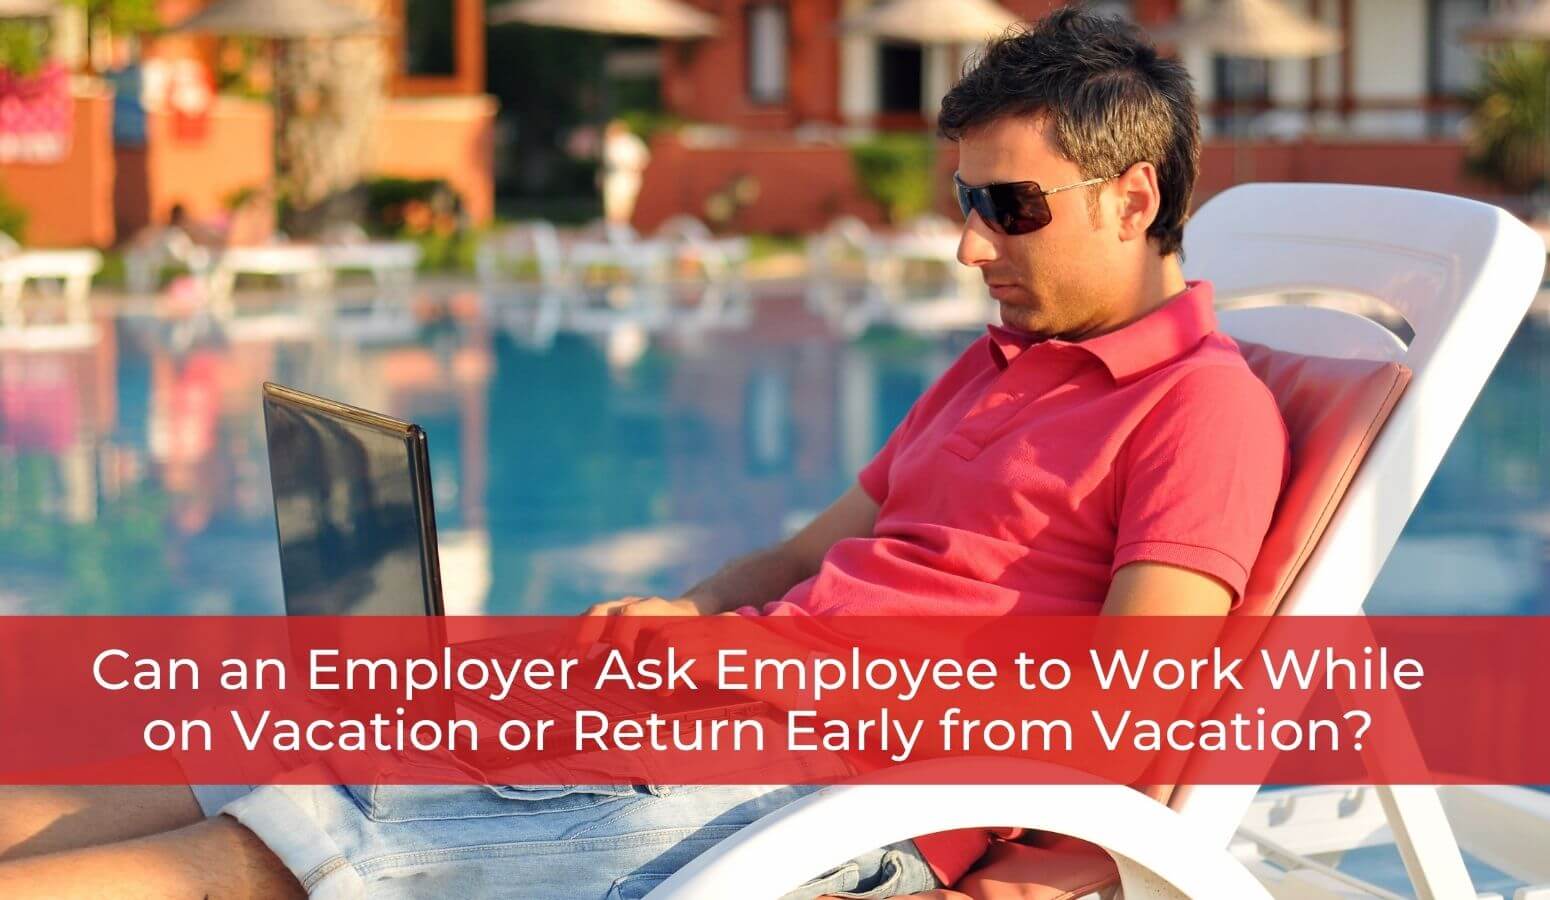 Featured image for “Can an Employer Ask Employee to Work While on Vacation or Return Early from Vacation?”